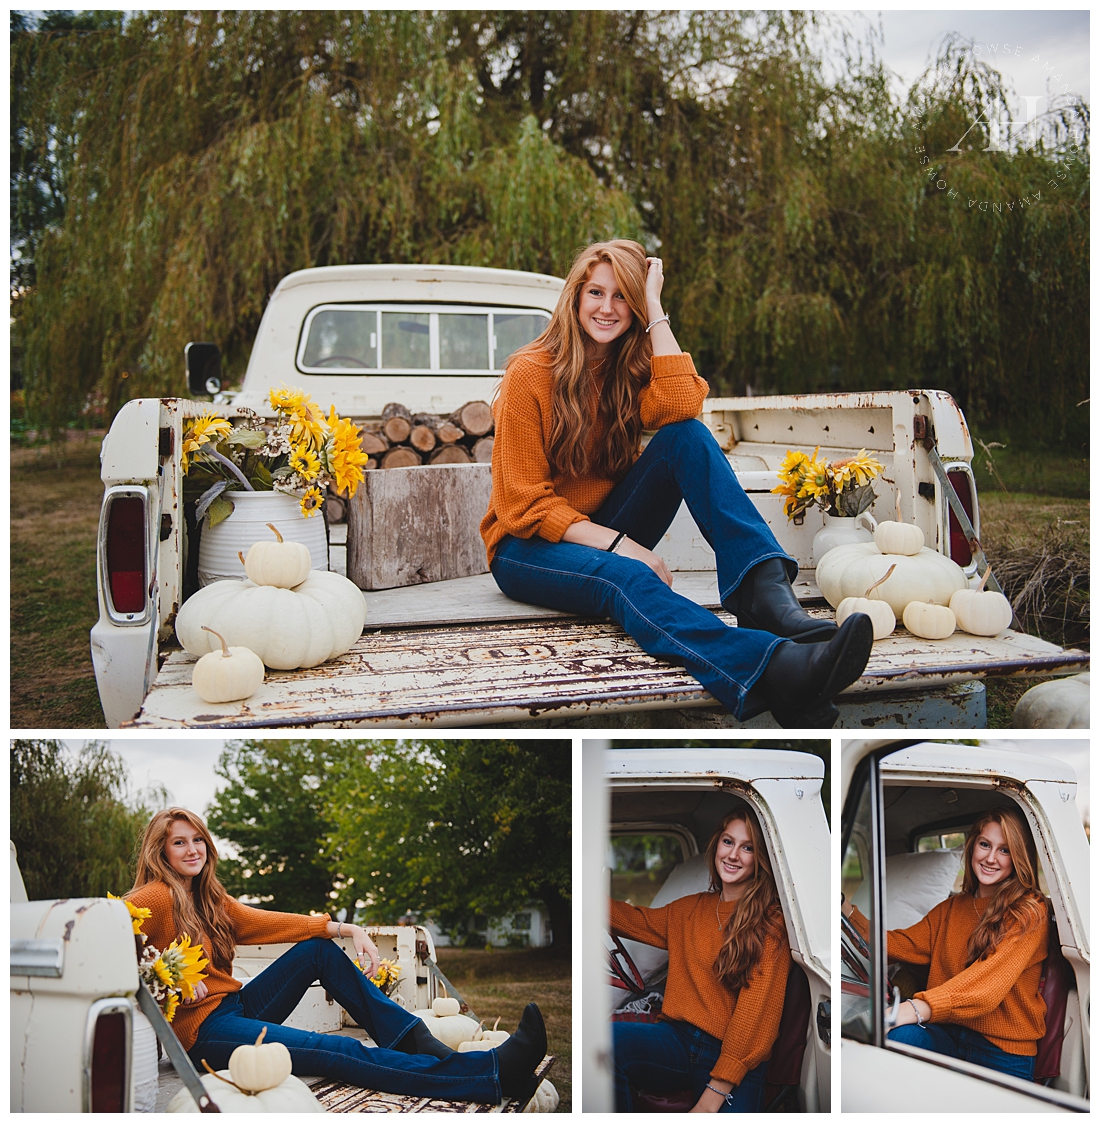 Senior Portraits on a Vintage Truck filled with Flowers, Firewood and Pumpkins 